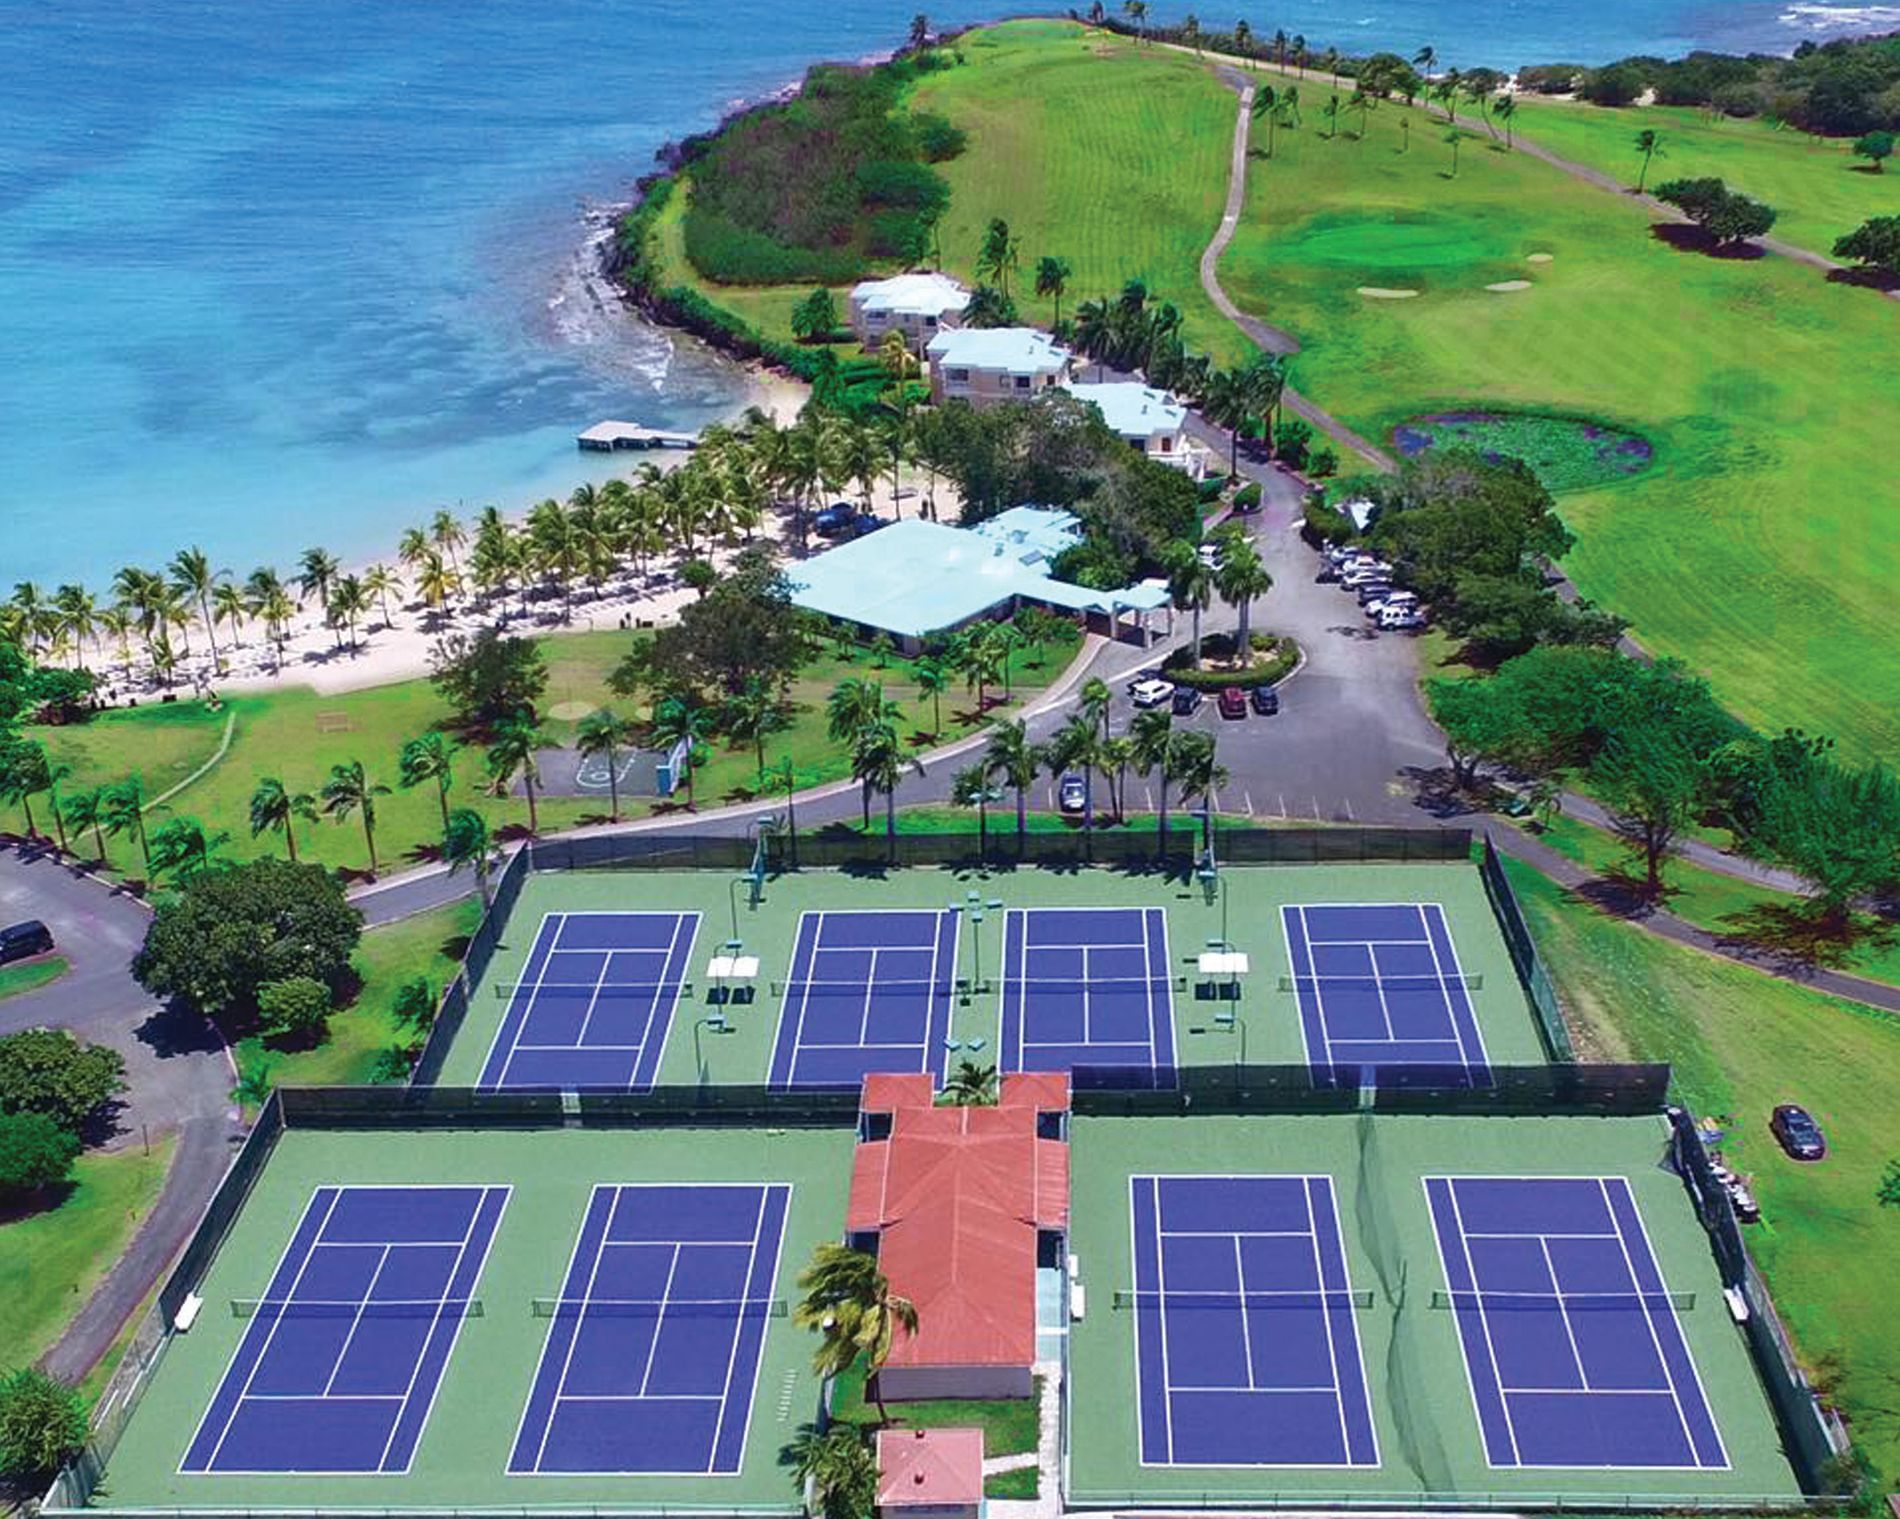 Aerial view of Tennis Courts by the ocean near The Buccaneer Resort St. Croix